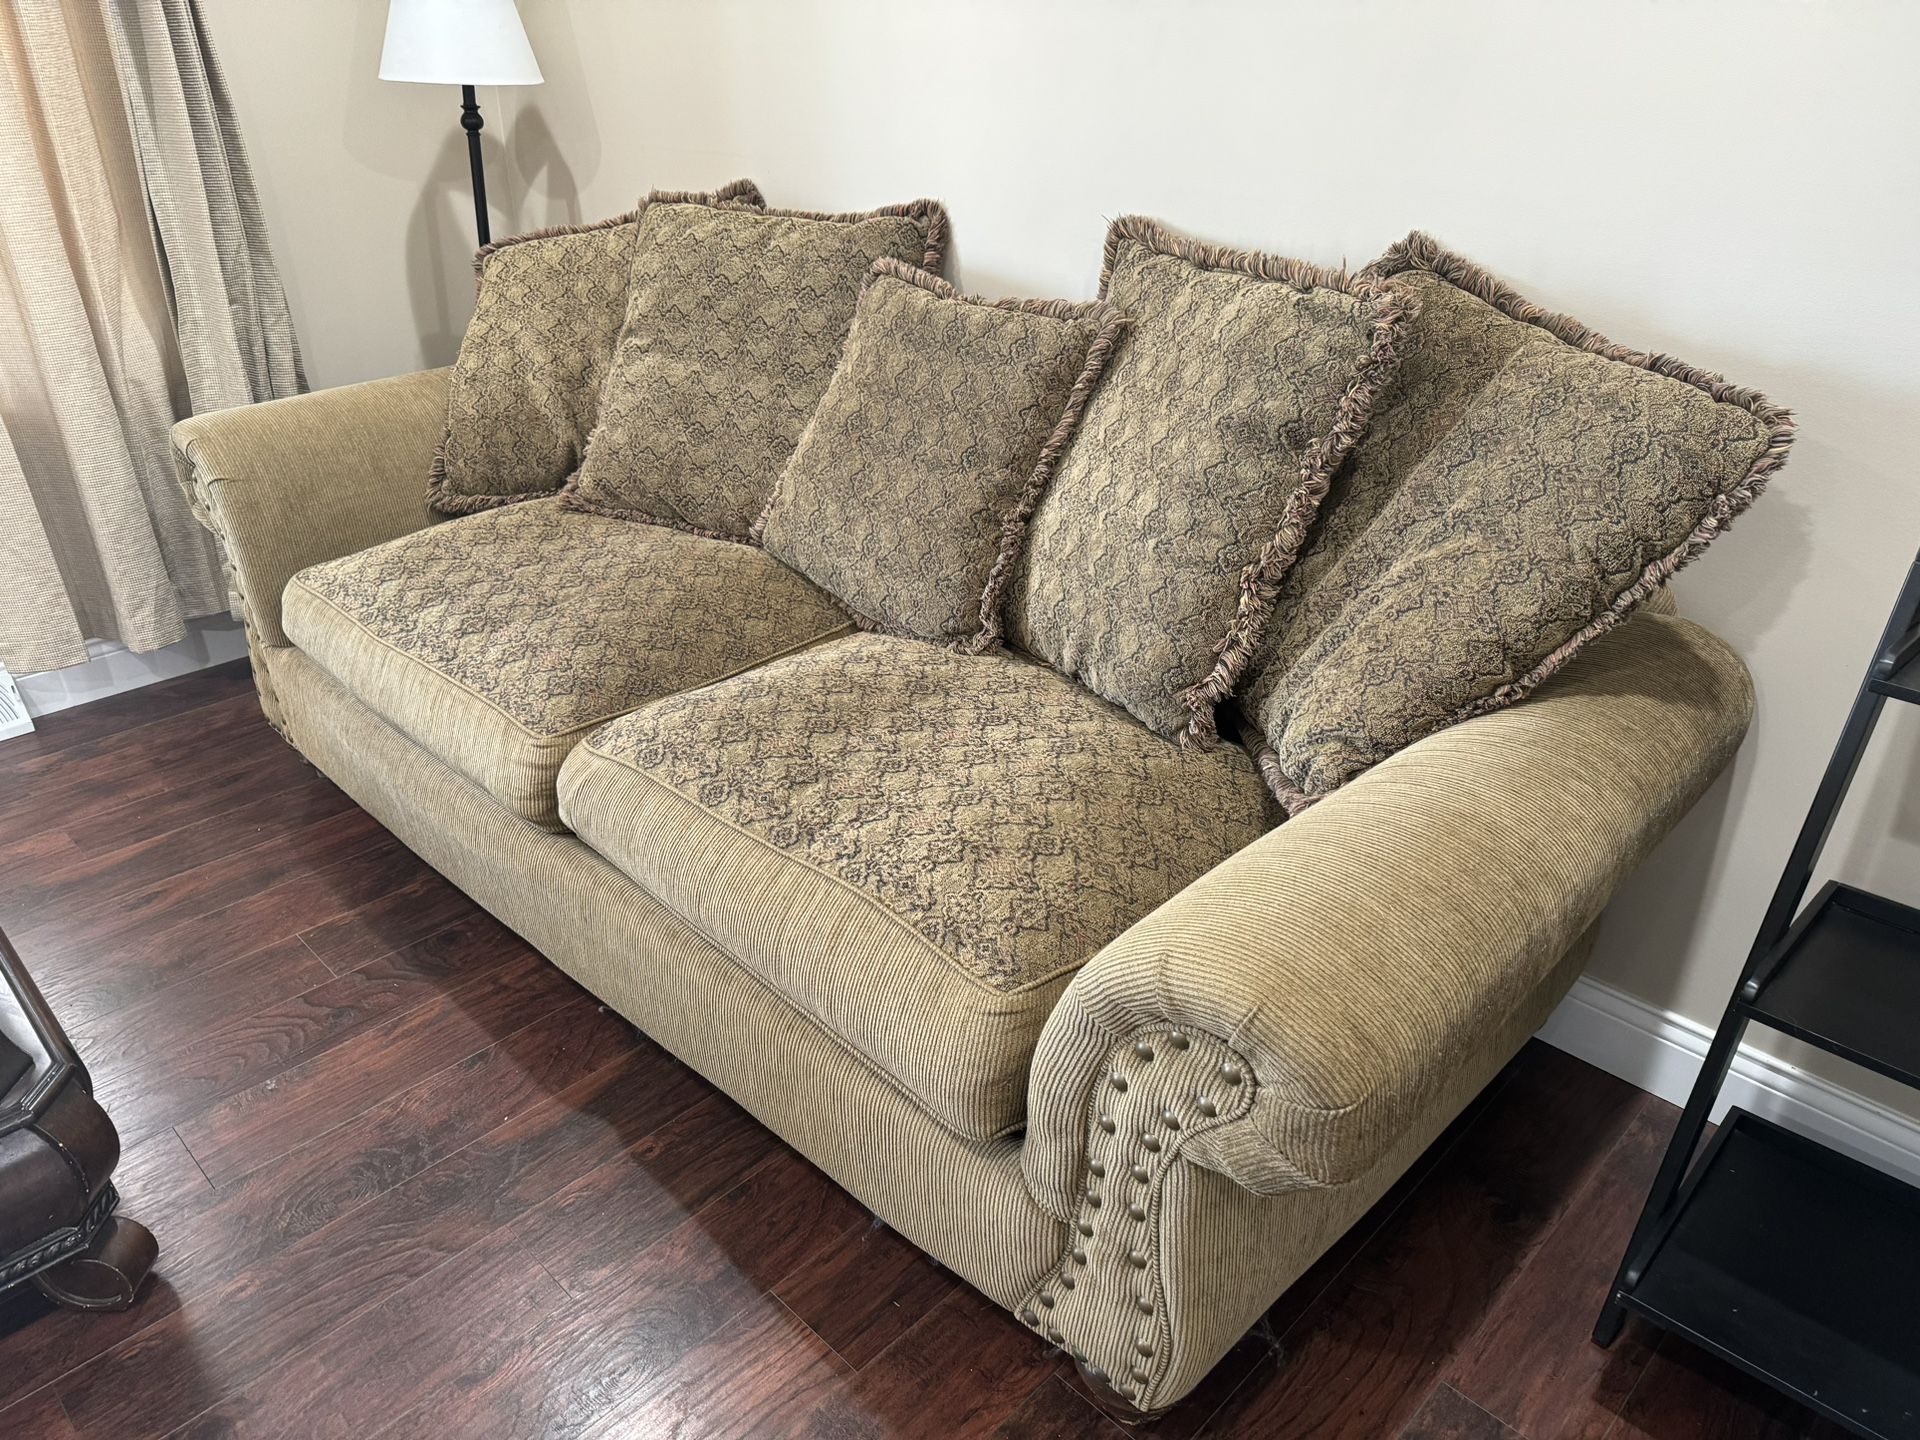 Couch And Chair For Sale.